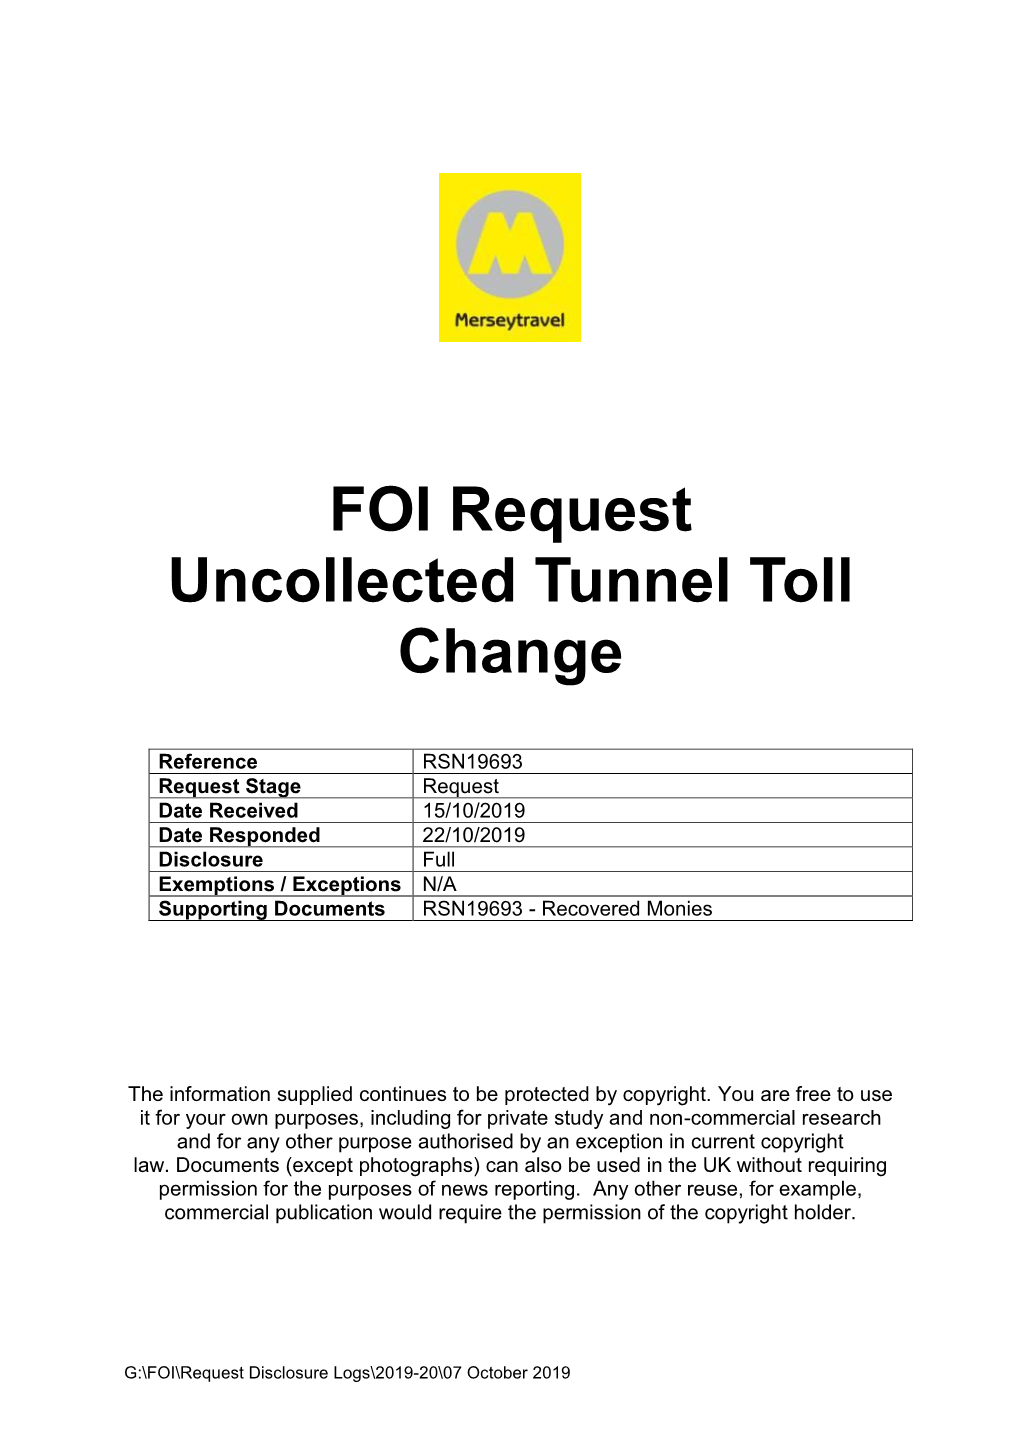 FOI Request Uncollected Tunnel Toll Change